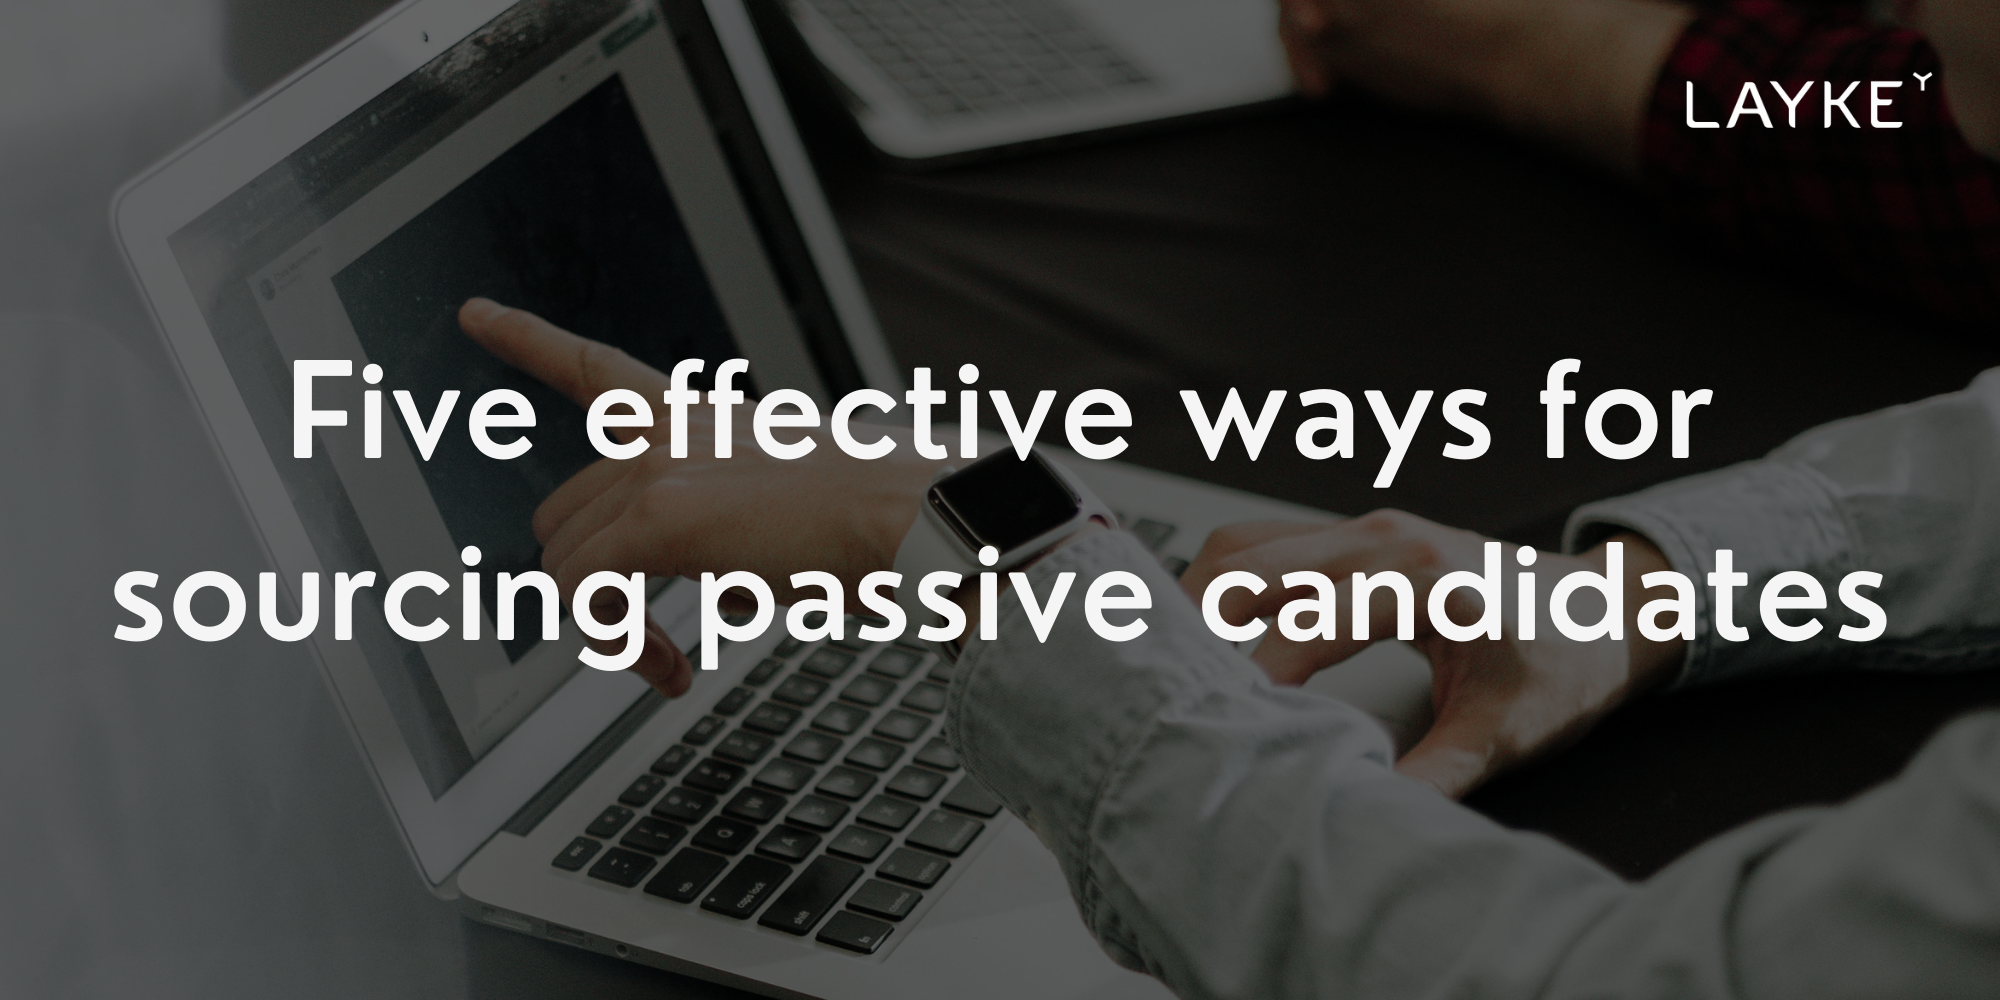 5 effective ways for sourcing passive candidates